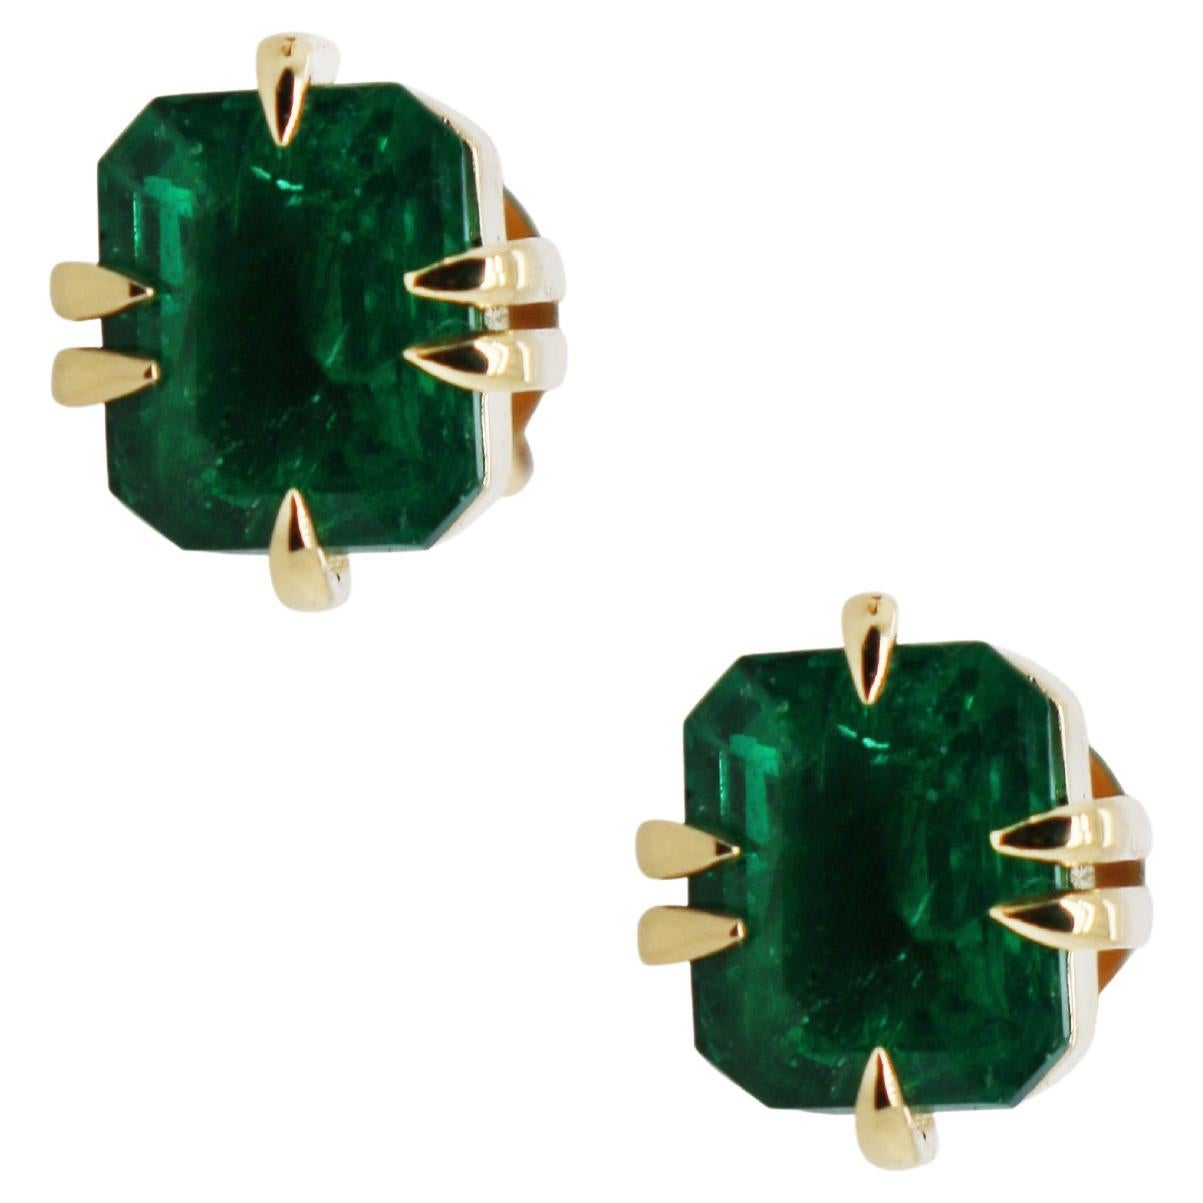 2ct pair of Emerald and 18k stud earrings  For Sale